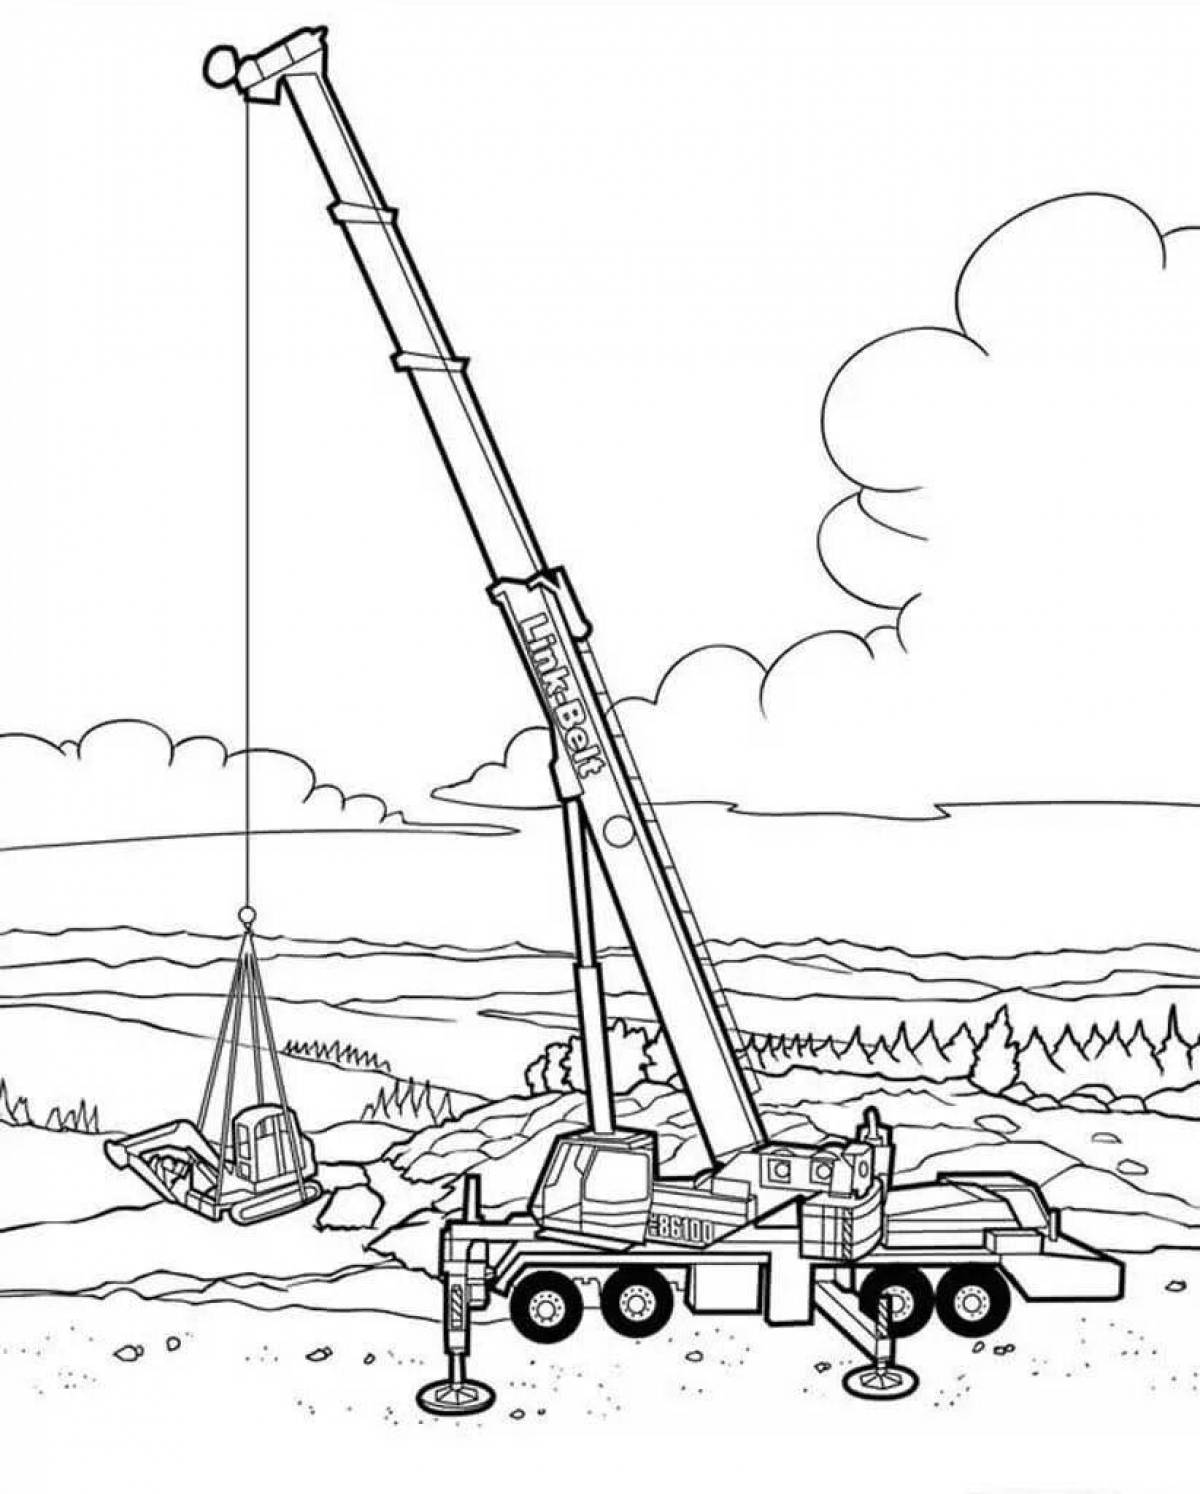 Playful Cranes Coloring Page for 5-6 year olds